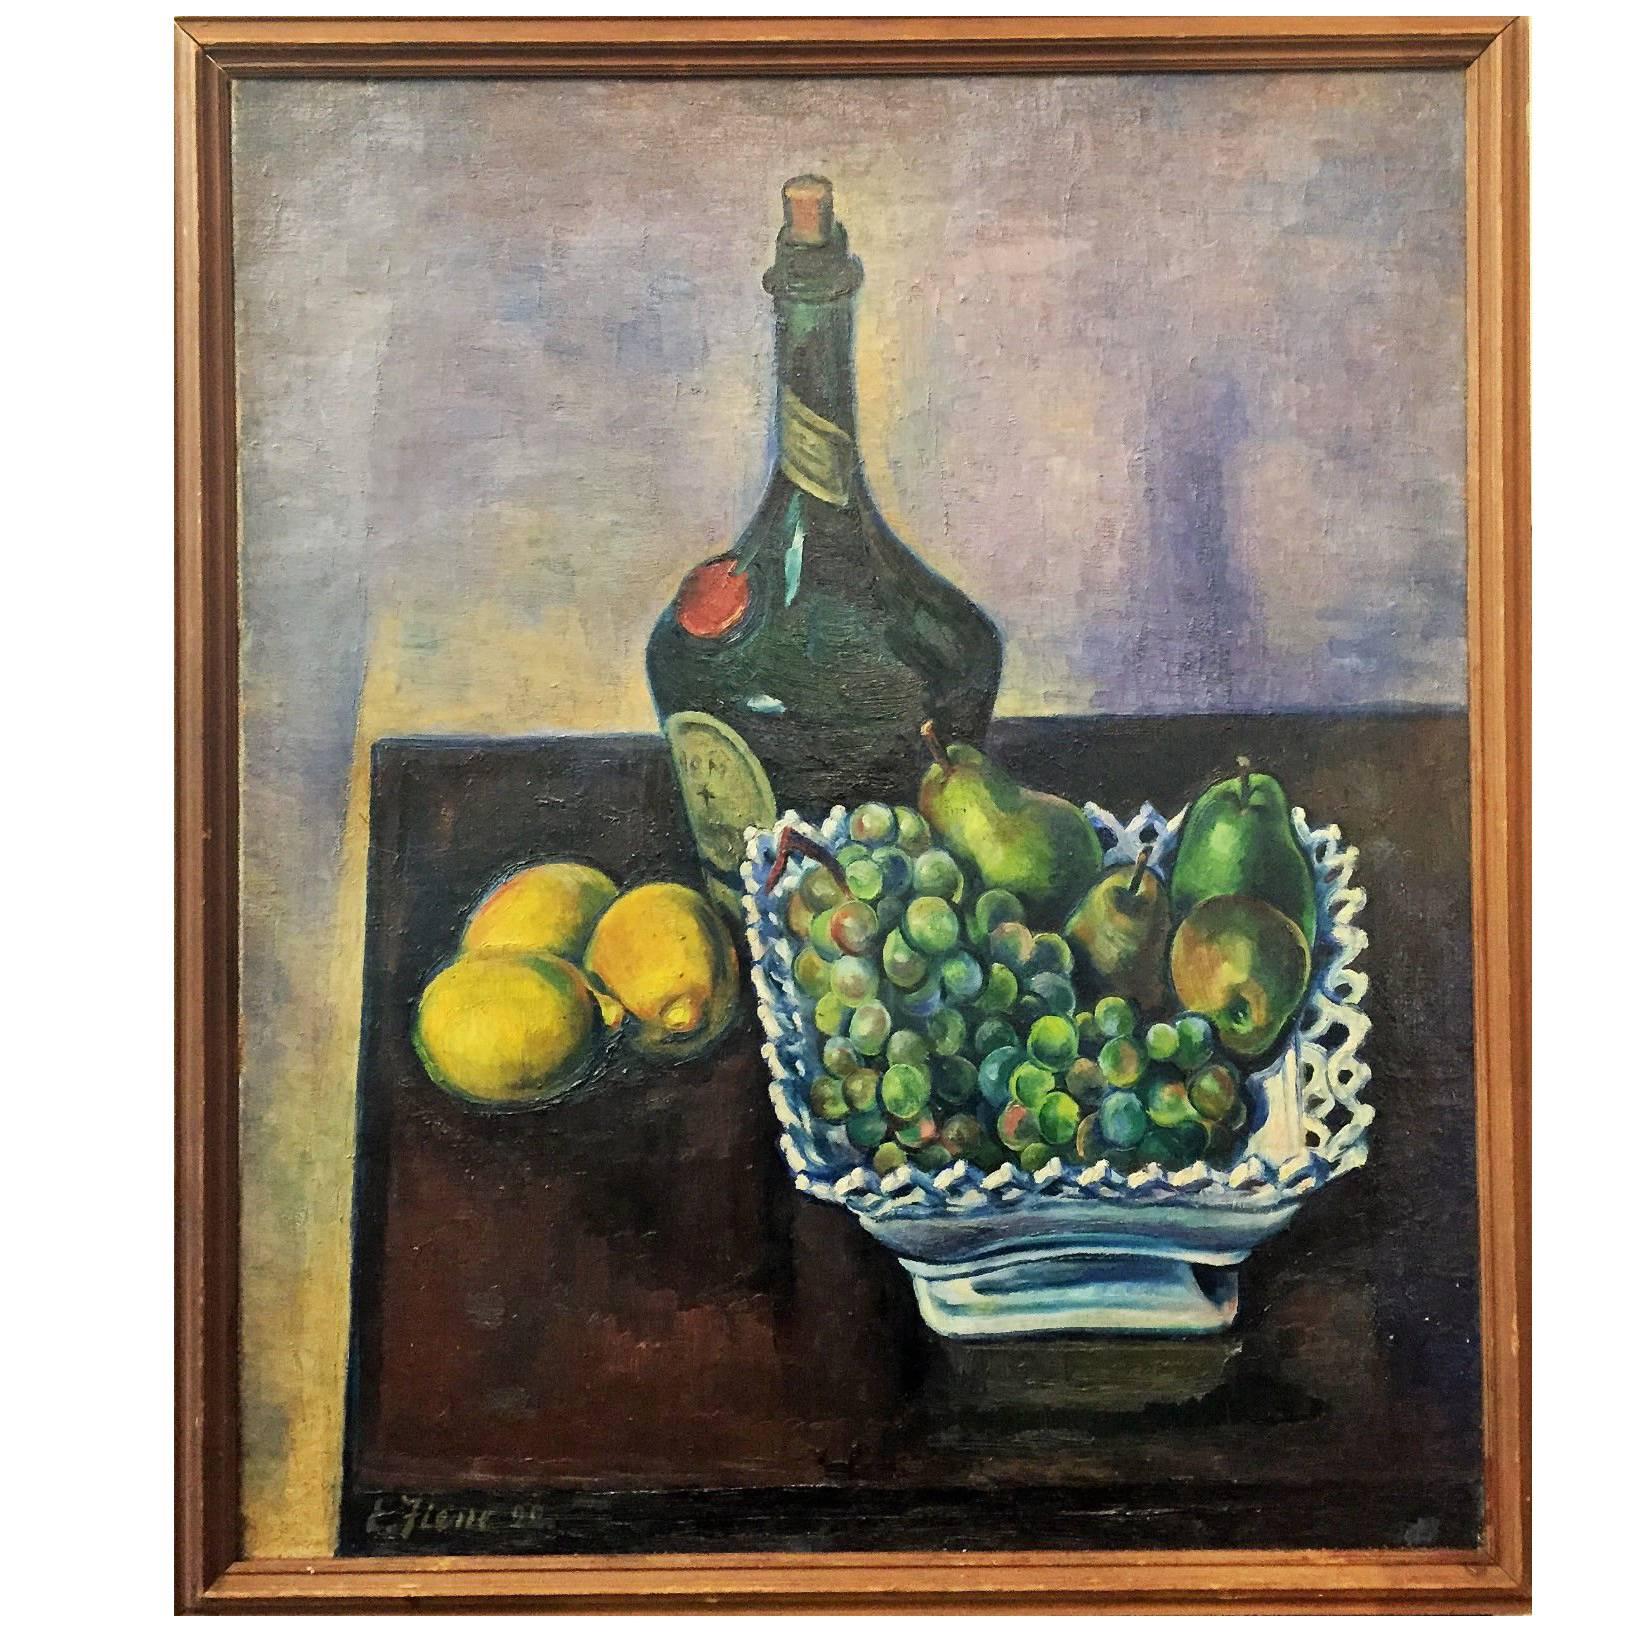 Ernest Fiene, Still Life with Cognac and Lemons Oil on Canvas Painting, 1922